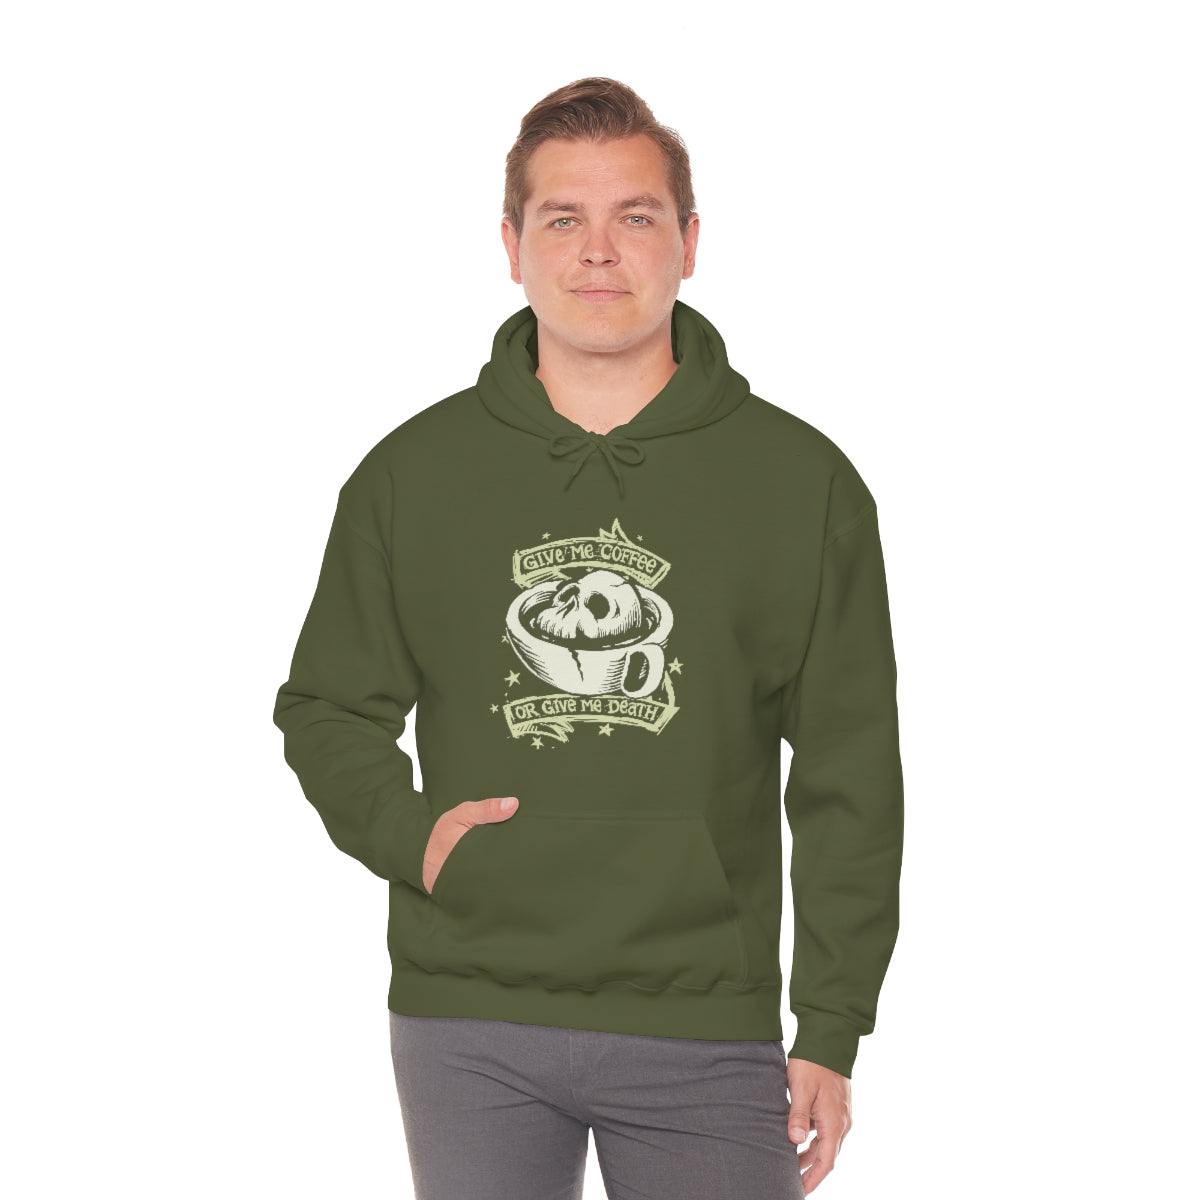 Give Me Coffee or Give Me Death Unisex Heavy Blend™ Hooded Sweatshirt